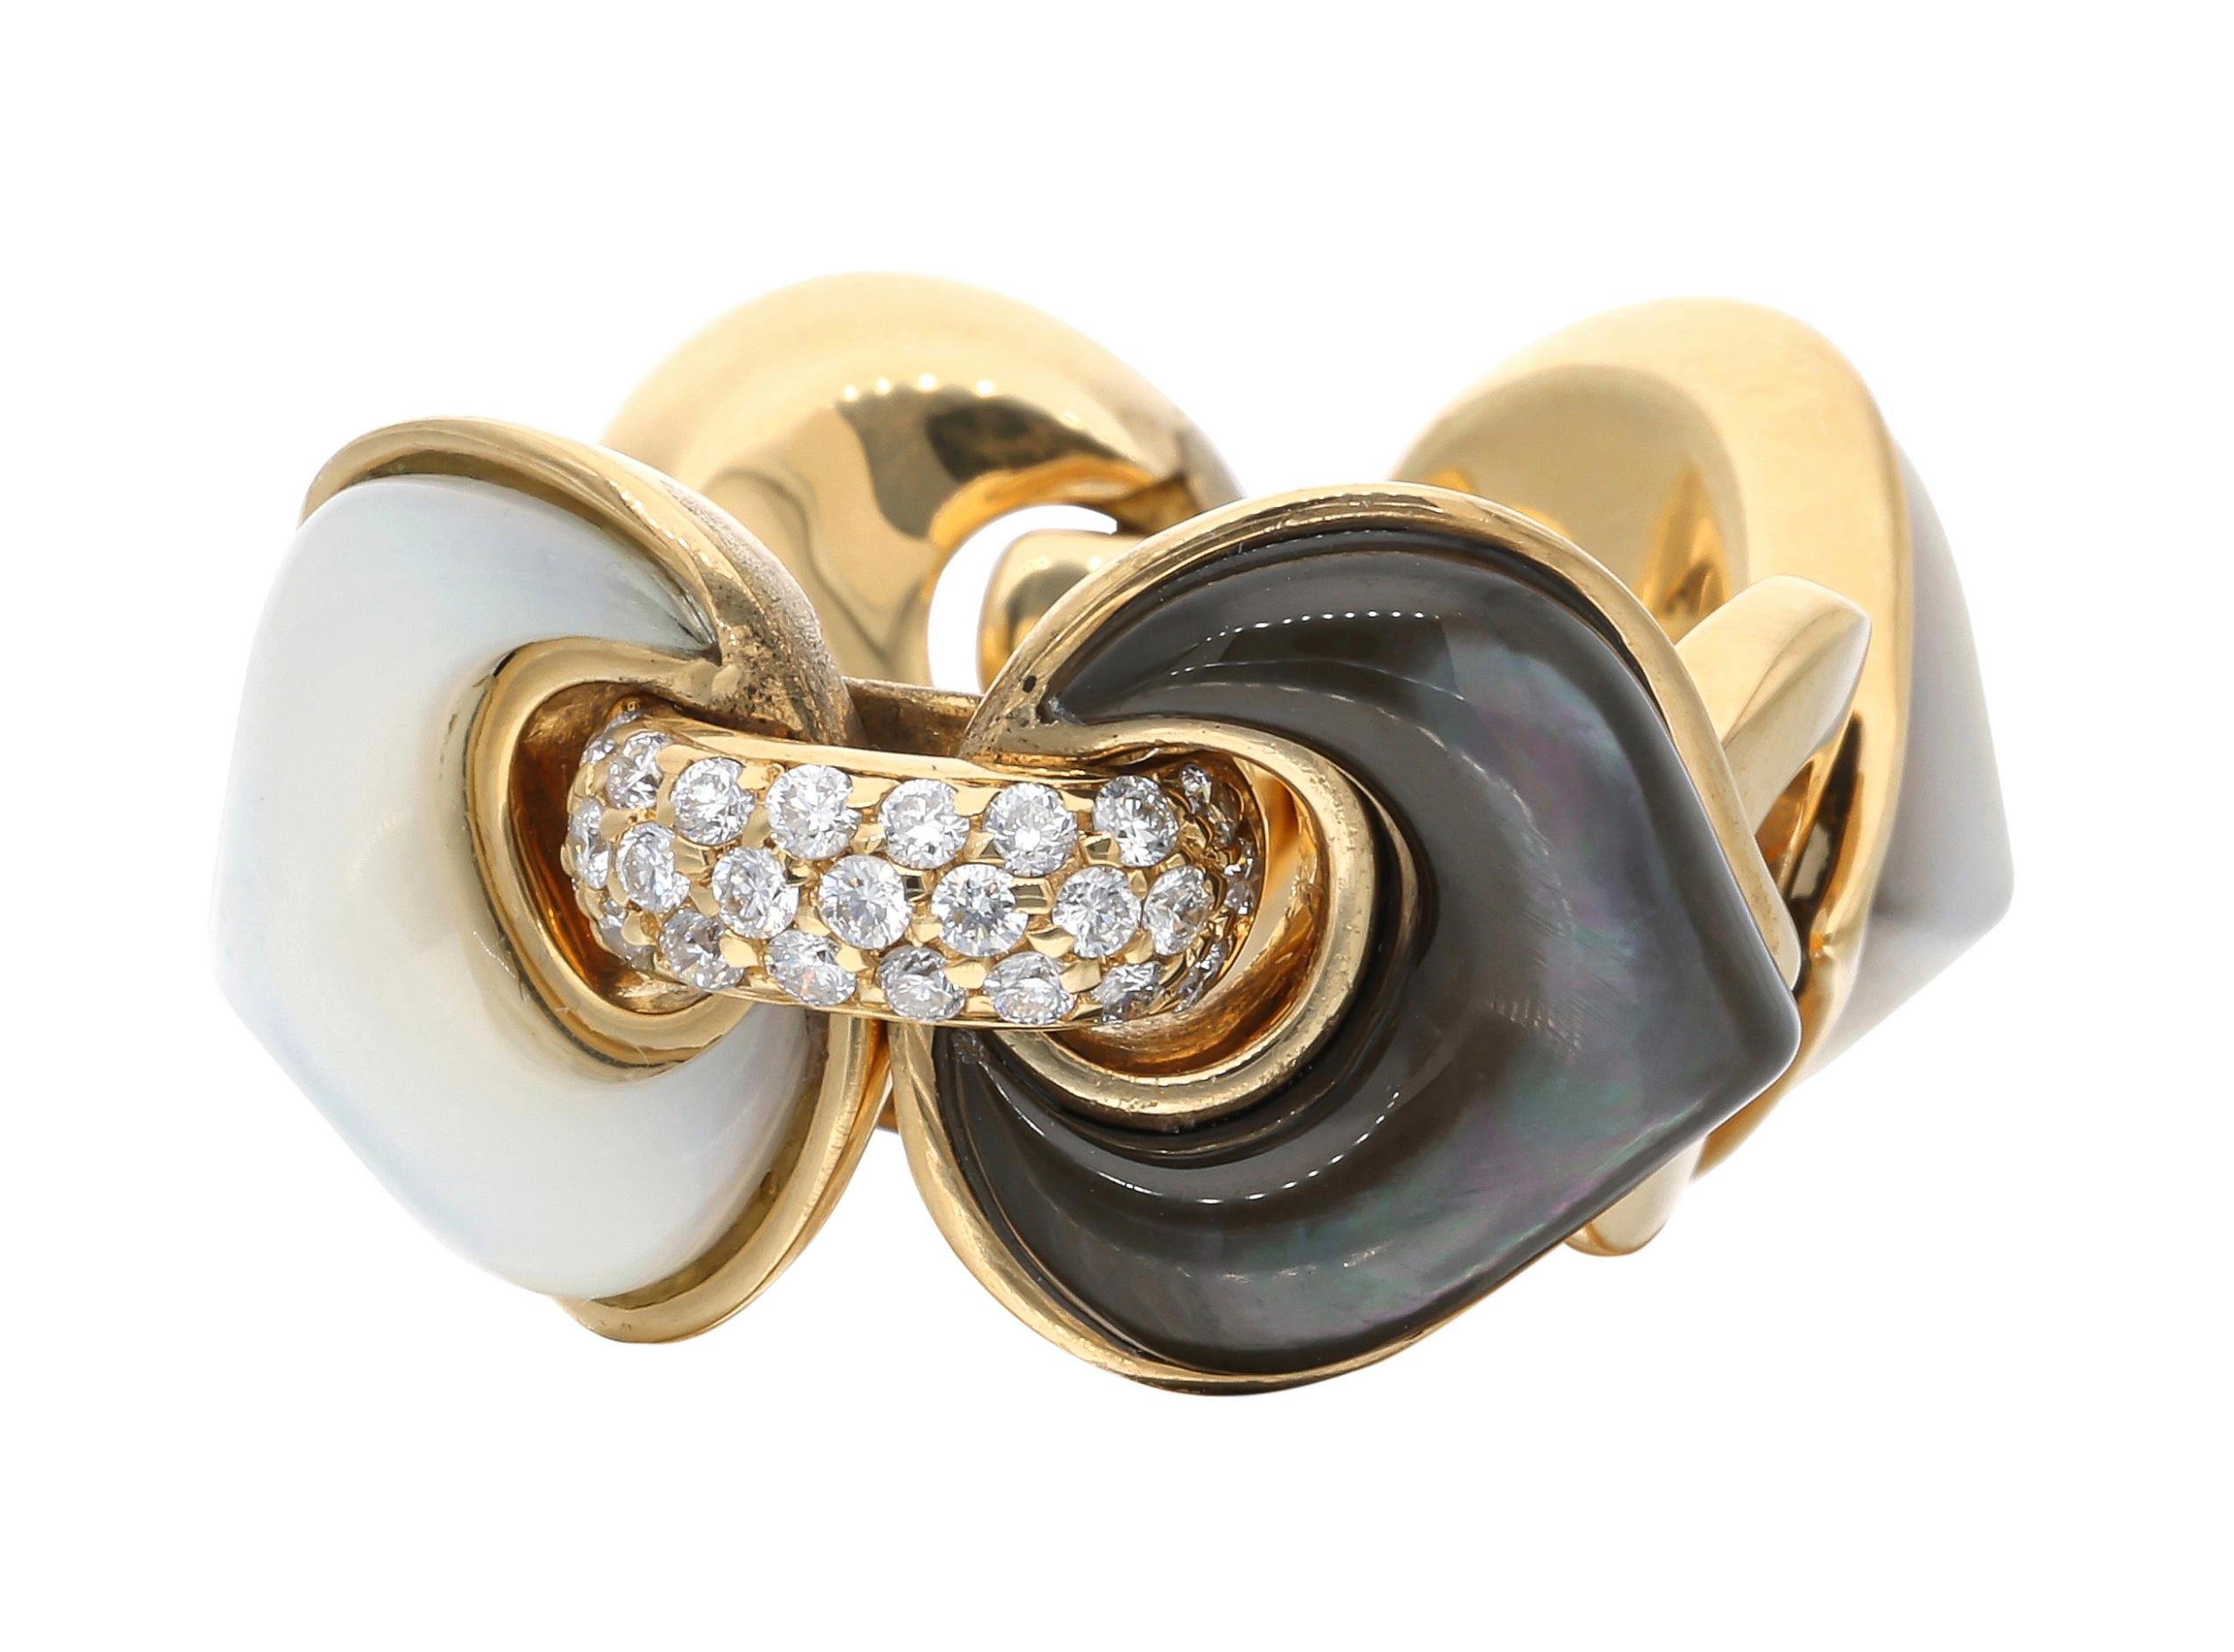 Composed of black and white mother of pearl, accented by round brilliant cut diamonds.

- Diamonds weigh a total of approximately 0.75 carat
- Signed Marina B with serial number
- 18 karat yellow gold
- Total weight 13.13 grams
- Size 8.5

The